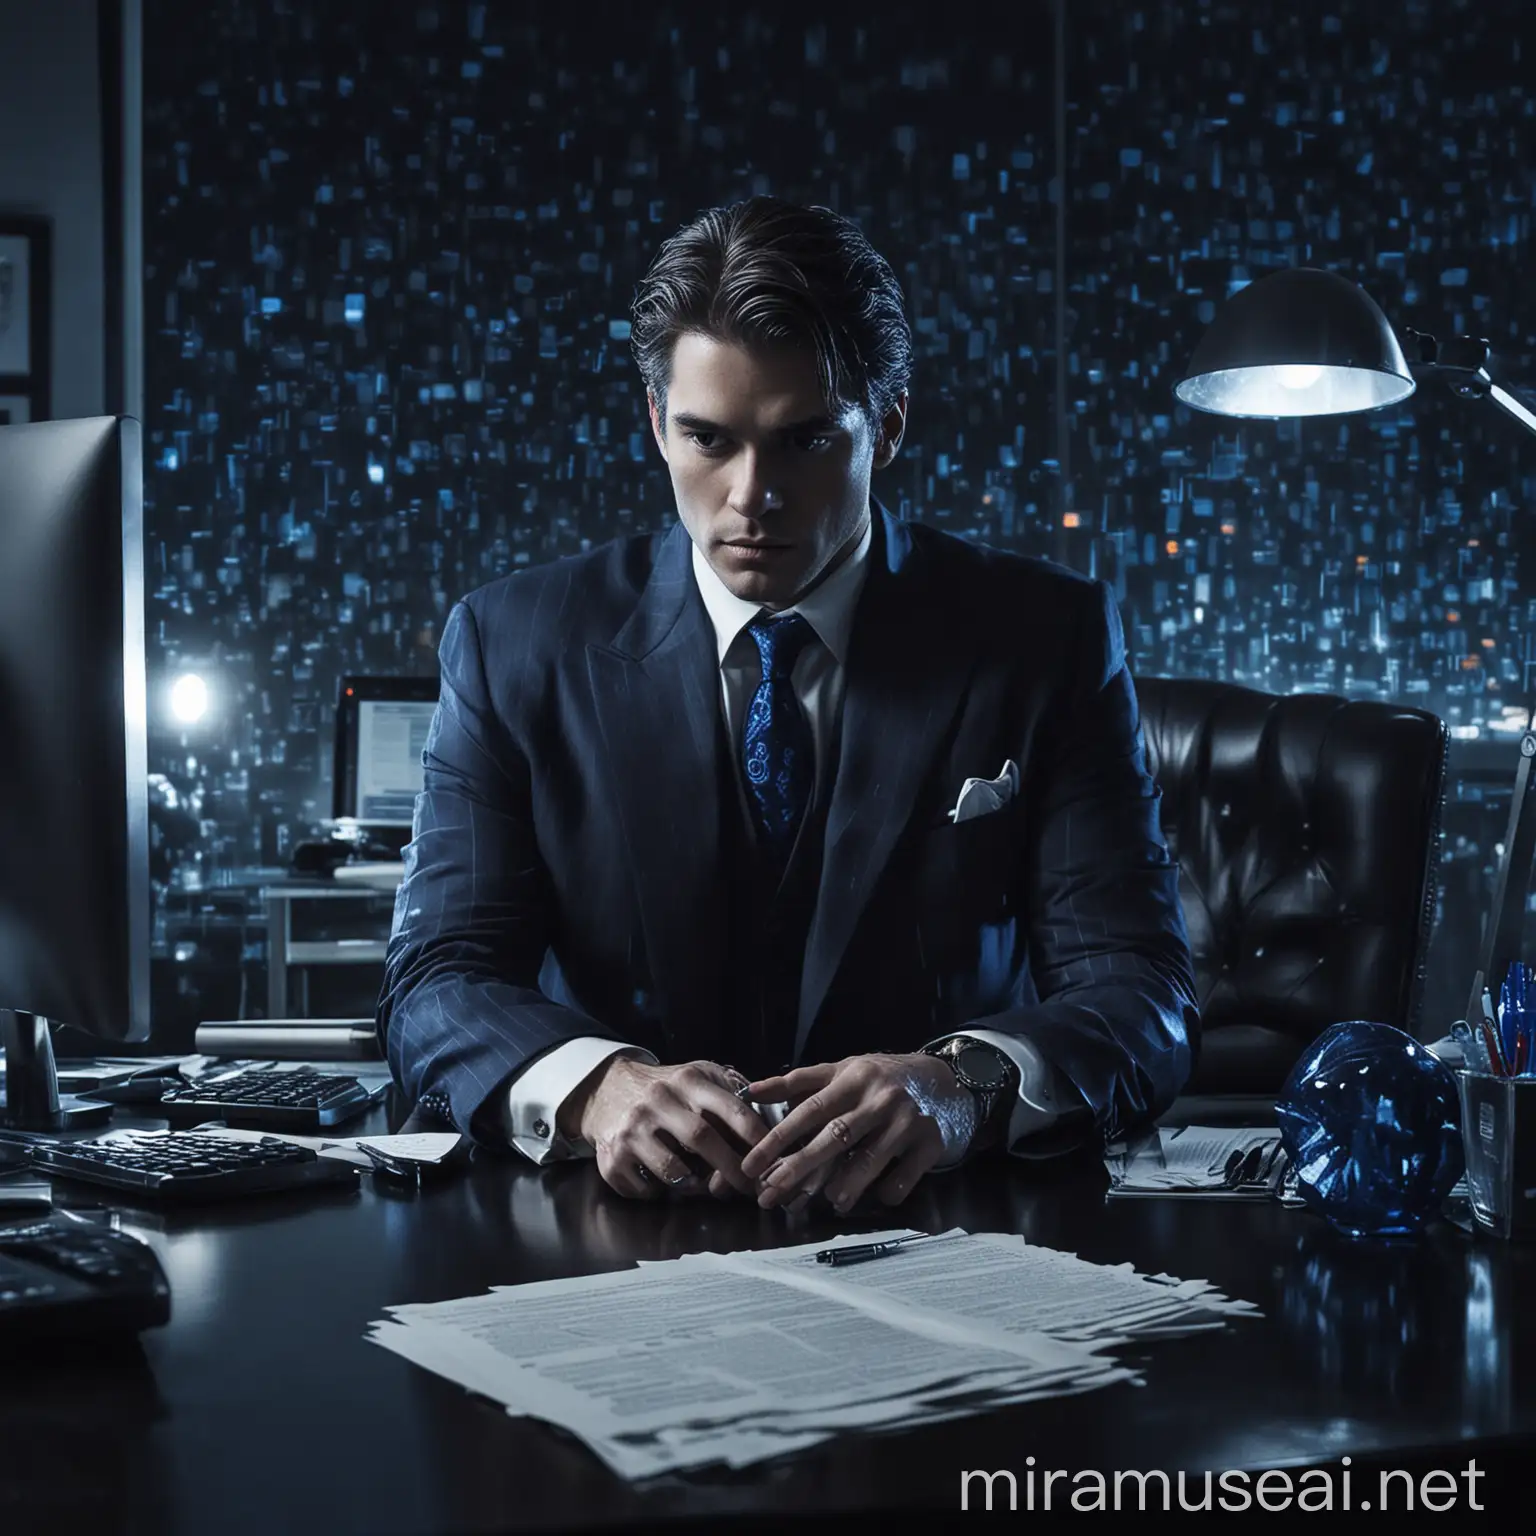 A bulked shredded man dressed in a suit, sitting in his very dark office of luxury, the office only has blue shiny luxurious objects emitting a little amount of blue and silverish light, he holds a handwritten paper on his hand , there is an apple computer on his desk, the background is of midnight with only moonlight shining over the scene, he his looking towards you